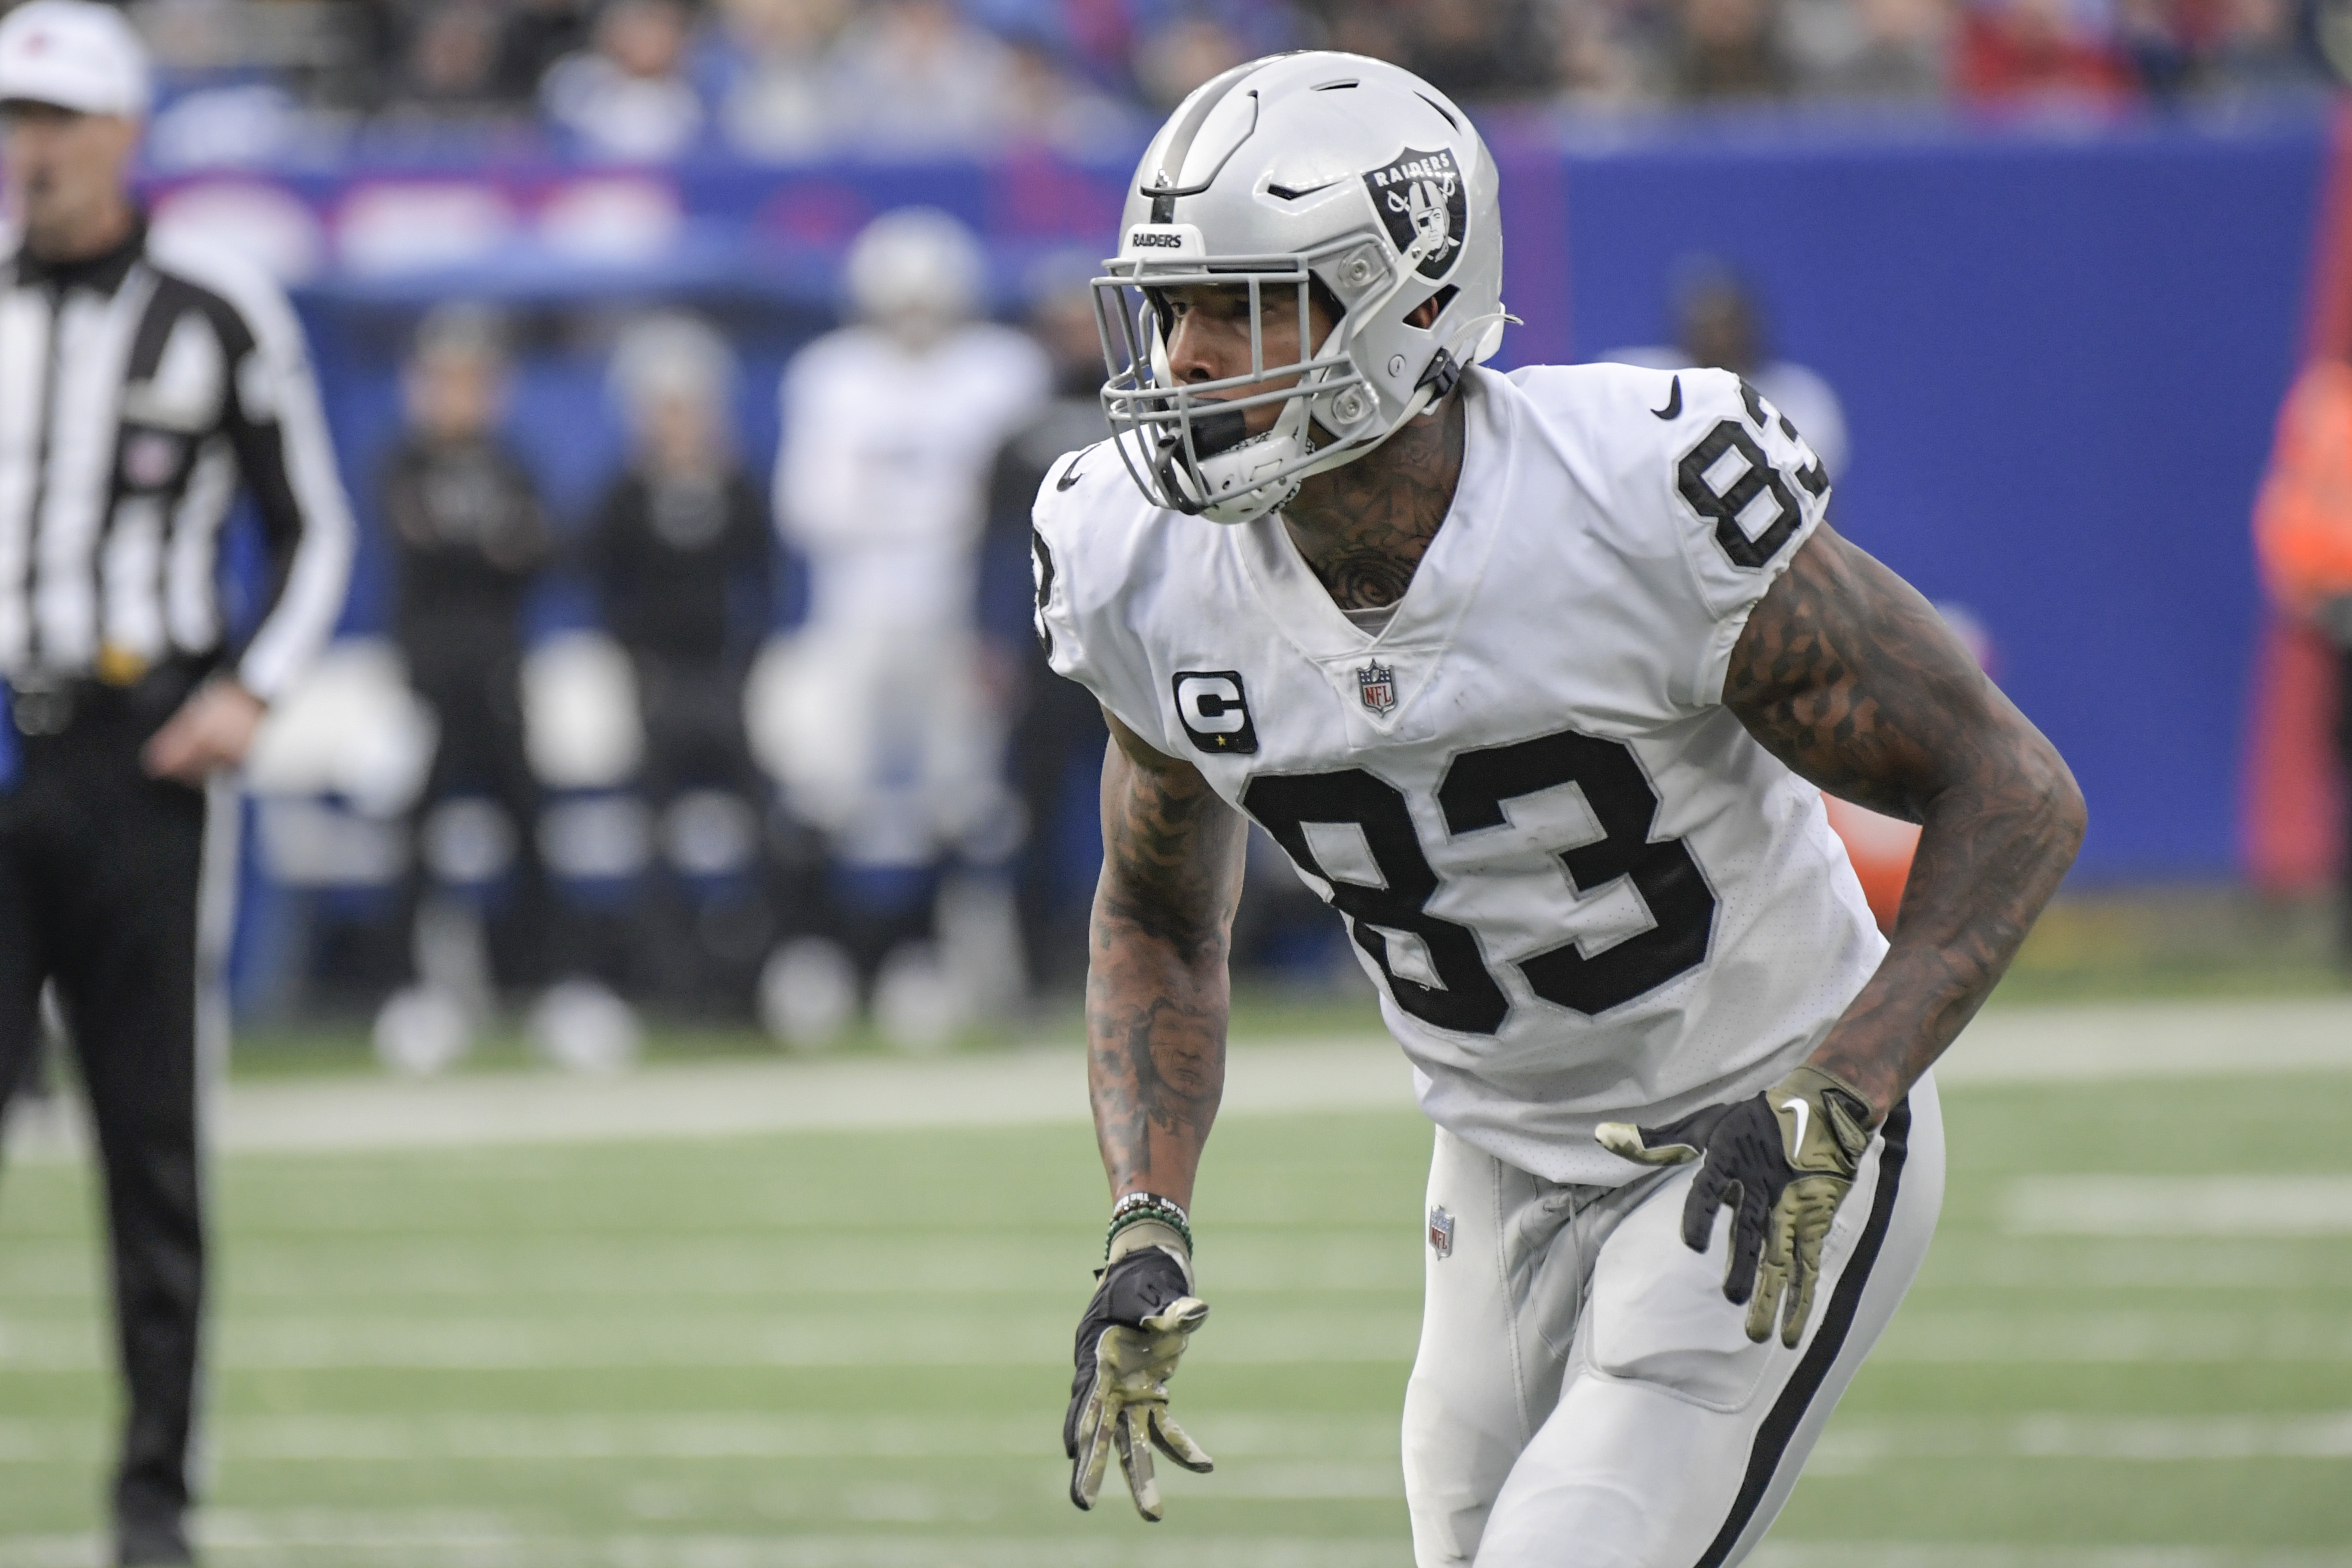 Raiders' Darren Waller's Knee Injury Diagnosed as Strained Iliotibial Band